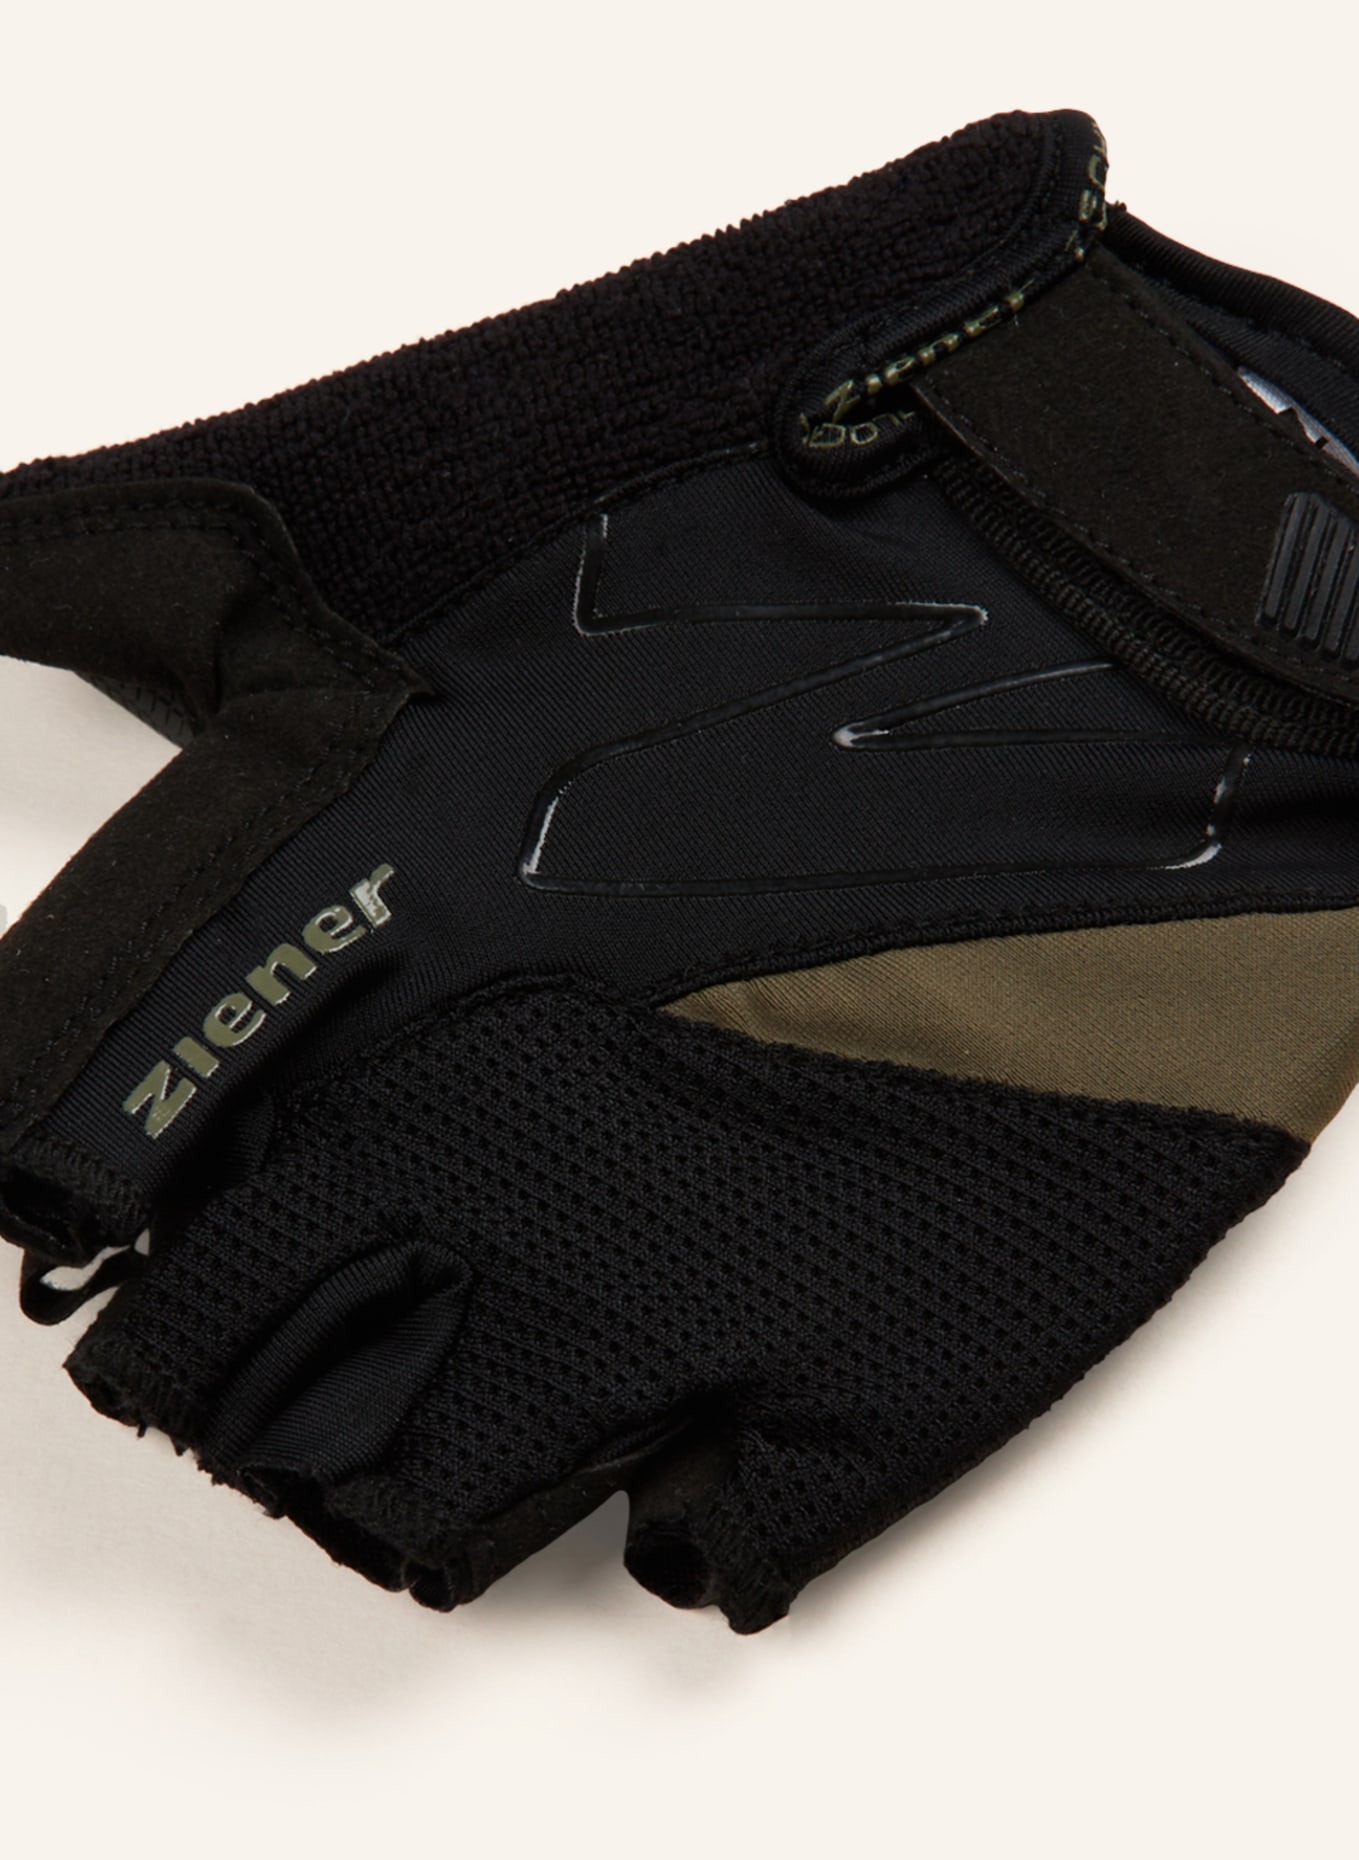 CRAVE in gloves black/ khaki ziener Cycling